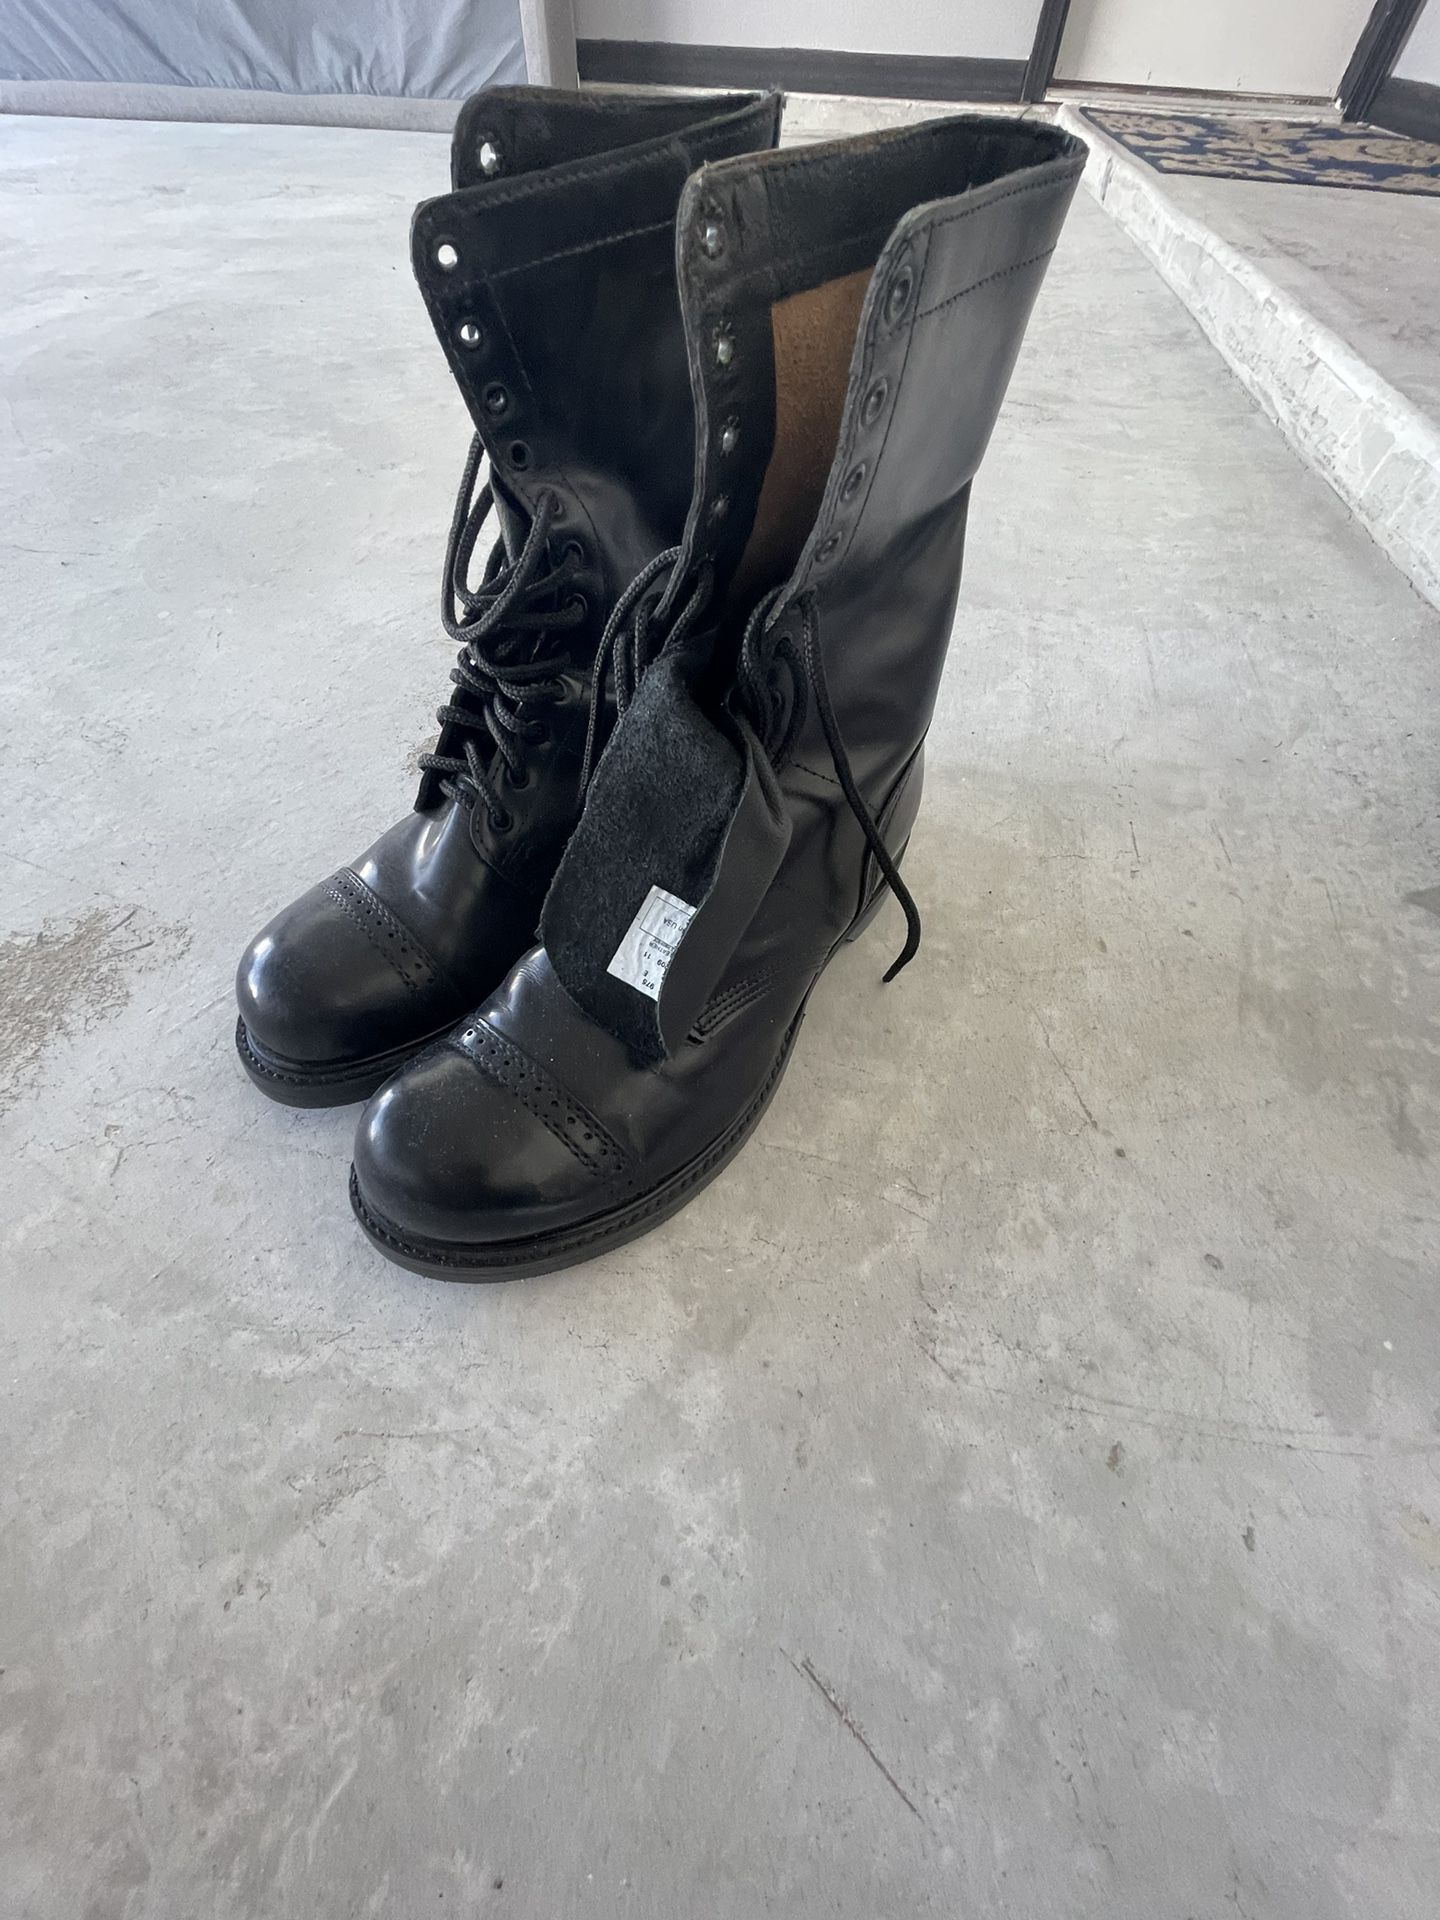 Military Jump Boots - Size 11